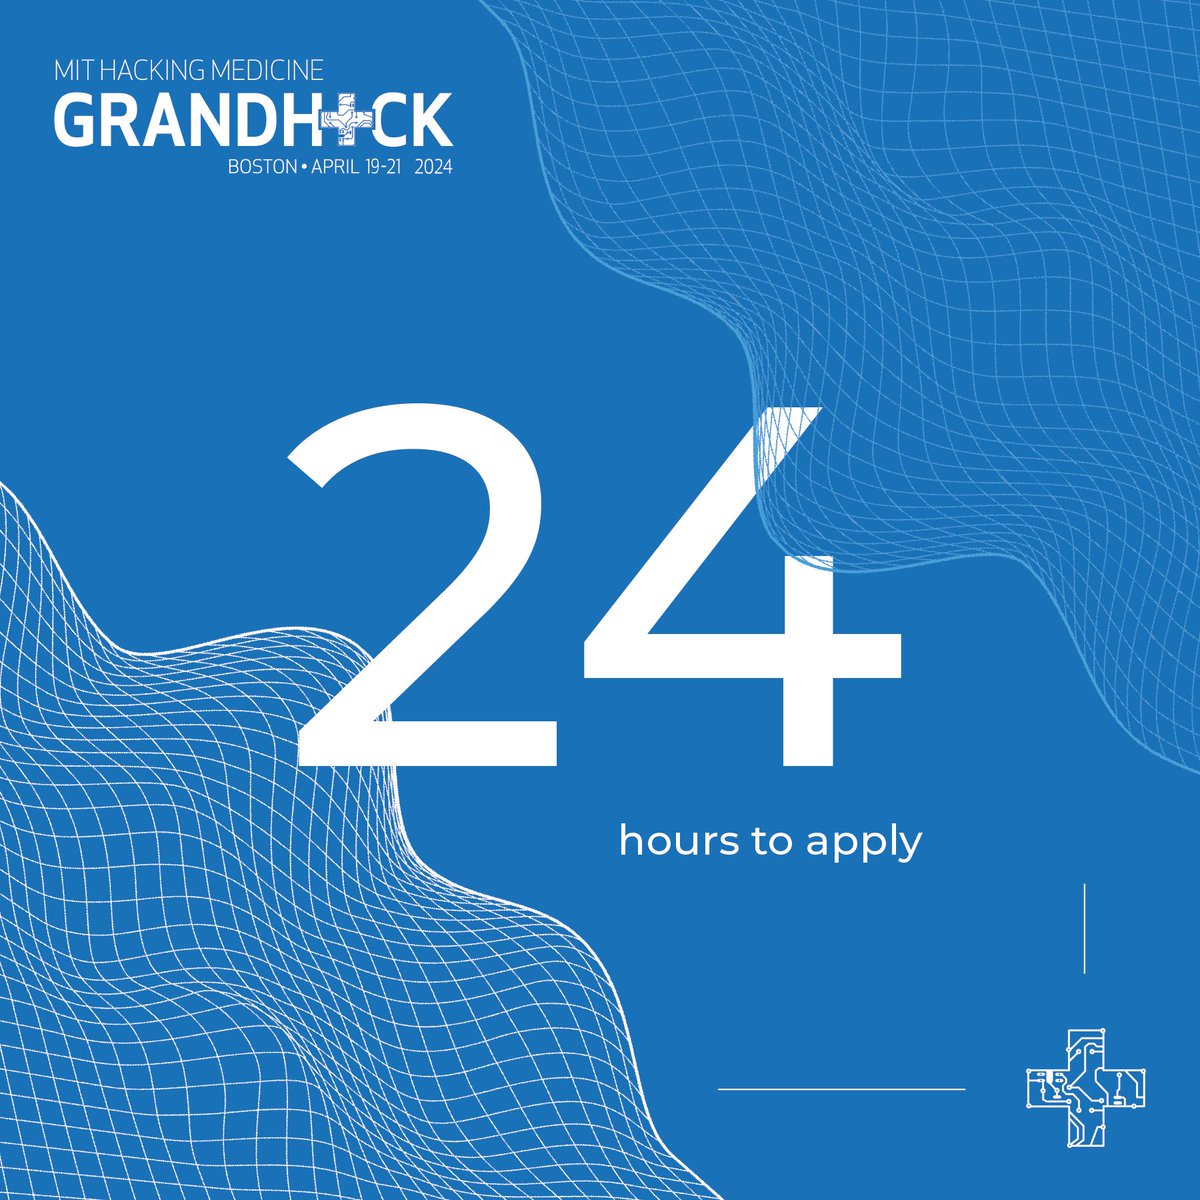 🚀🕒 Last Chance Alert! 🚀🕒 Don't miss out on #GrandHack24 - where innovation meets healthcare! 🌟 Join us April 19th - 21st at MIT! Meet other innovators & ideate solutions to pressing healthcare problems! Apply NOW before it's too late! 🔥💡 grandhack.mit.edu/gh24/apply